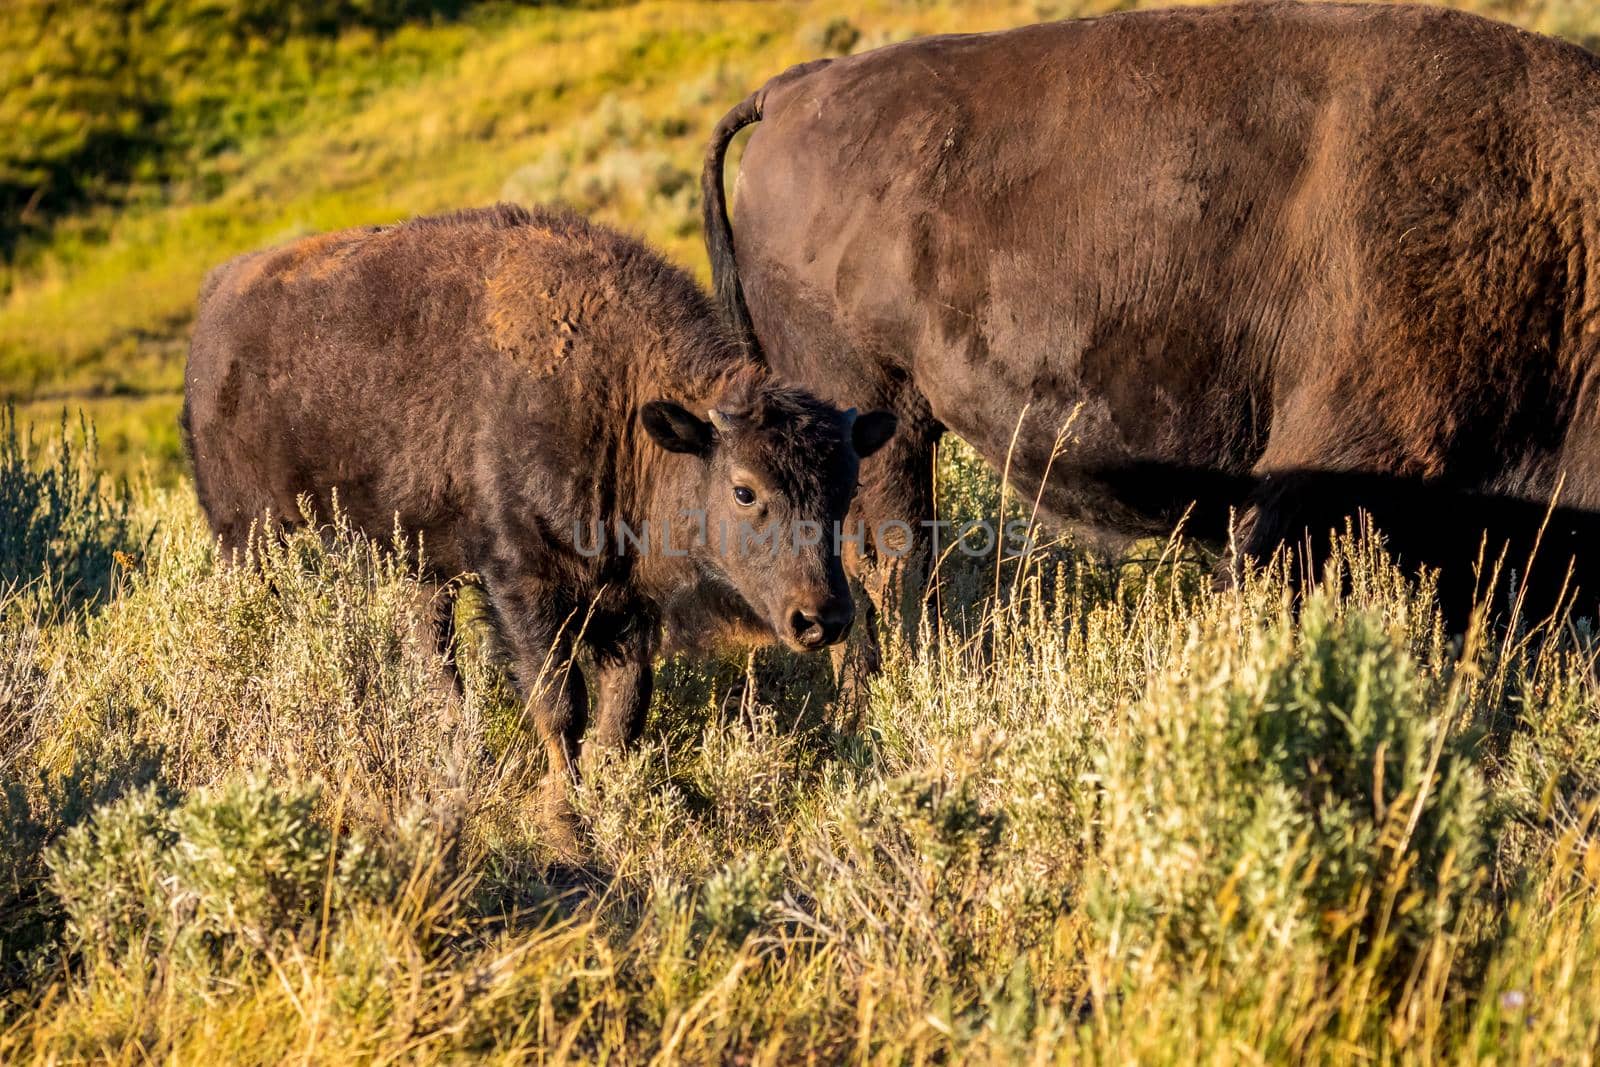 WIld bison calf at Yellowstone National Park